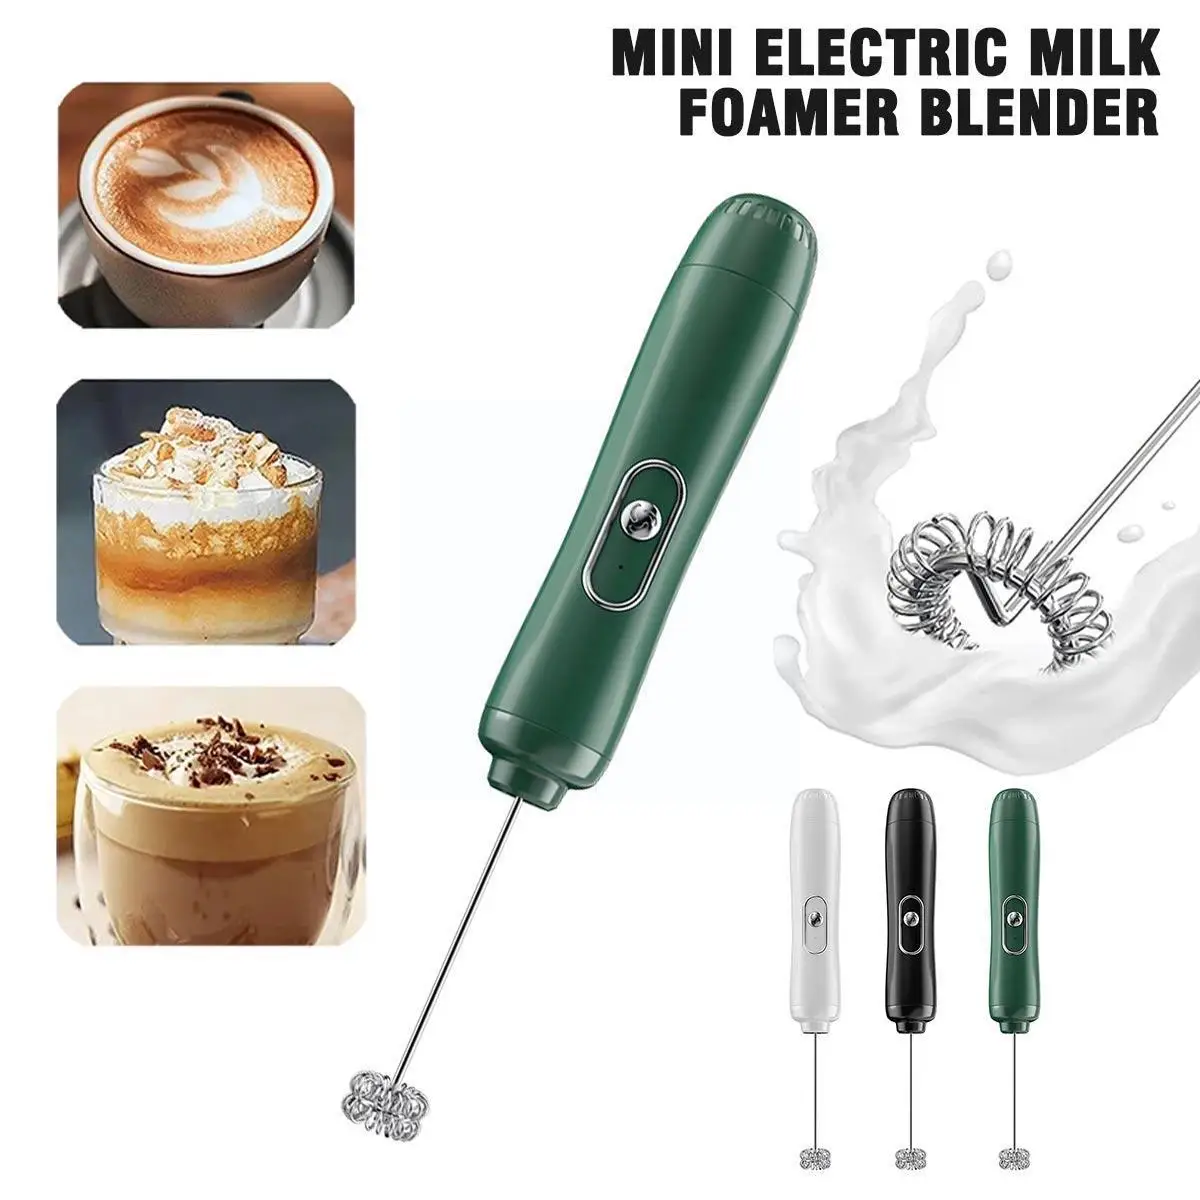 

Mini Handheld Electric Milk Foamer Blender Wireless Cappuccino Egg Tools Whisk Gadget Kitchen Frother Beater Mixer Coffee M Y4B8